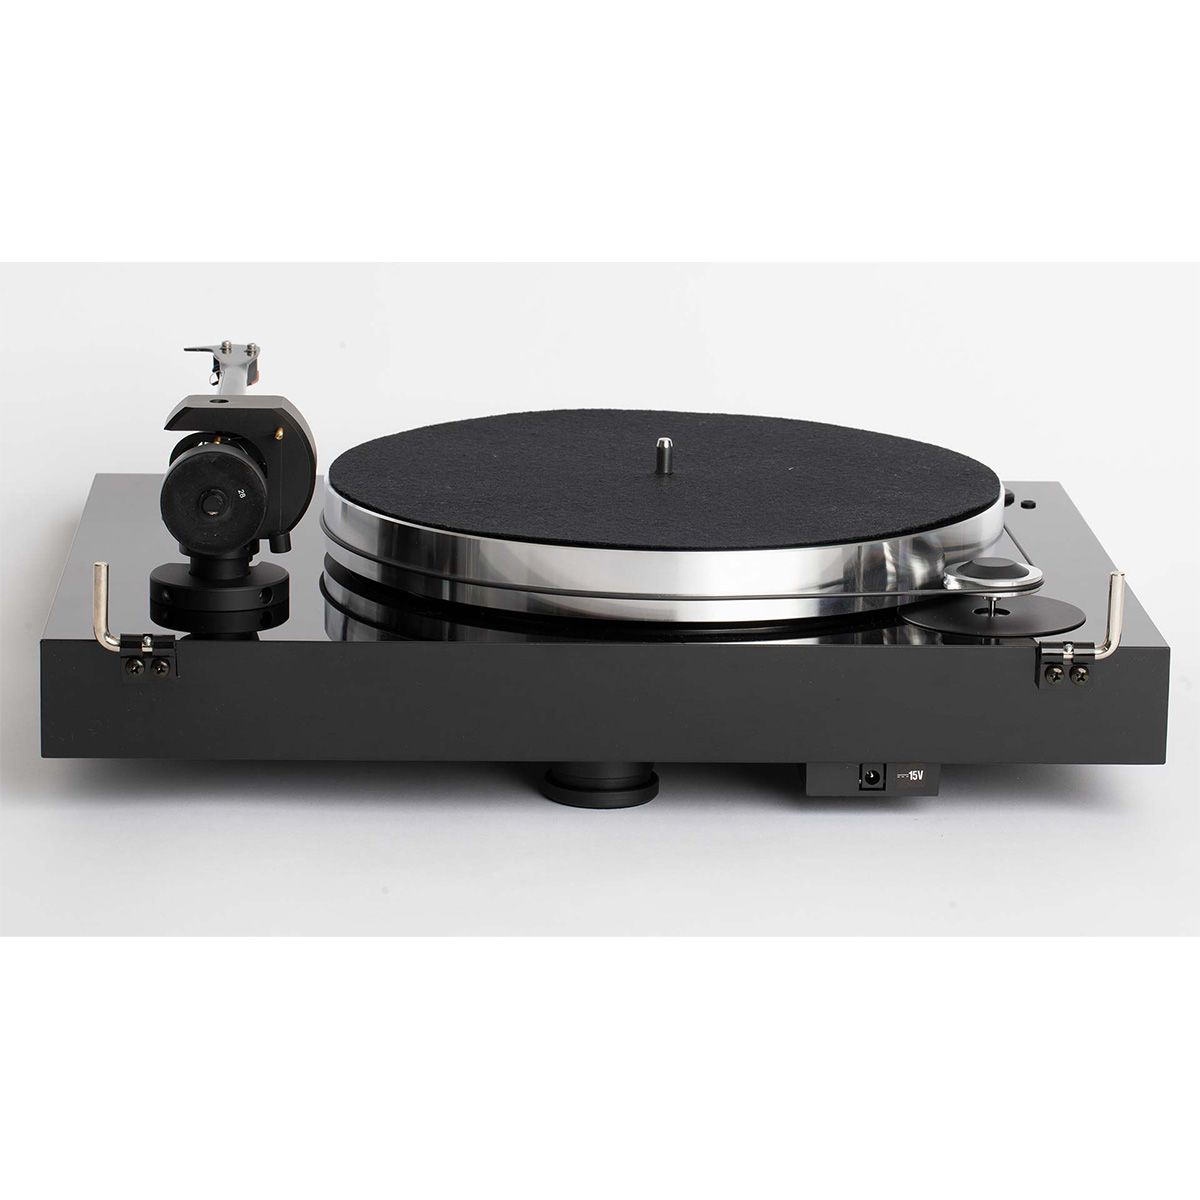 
Pro-Ject X8 Evolution Turntable
